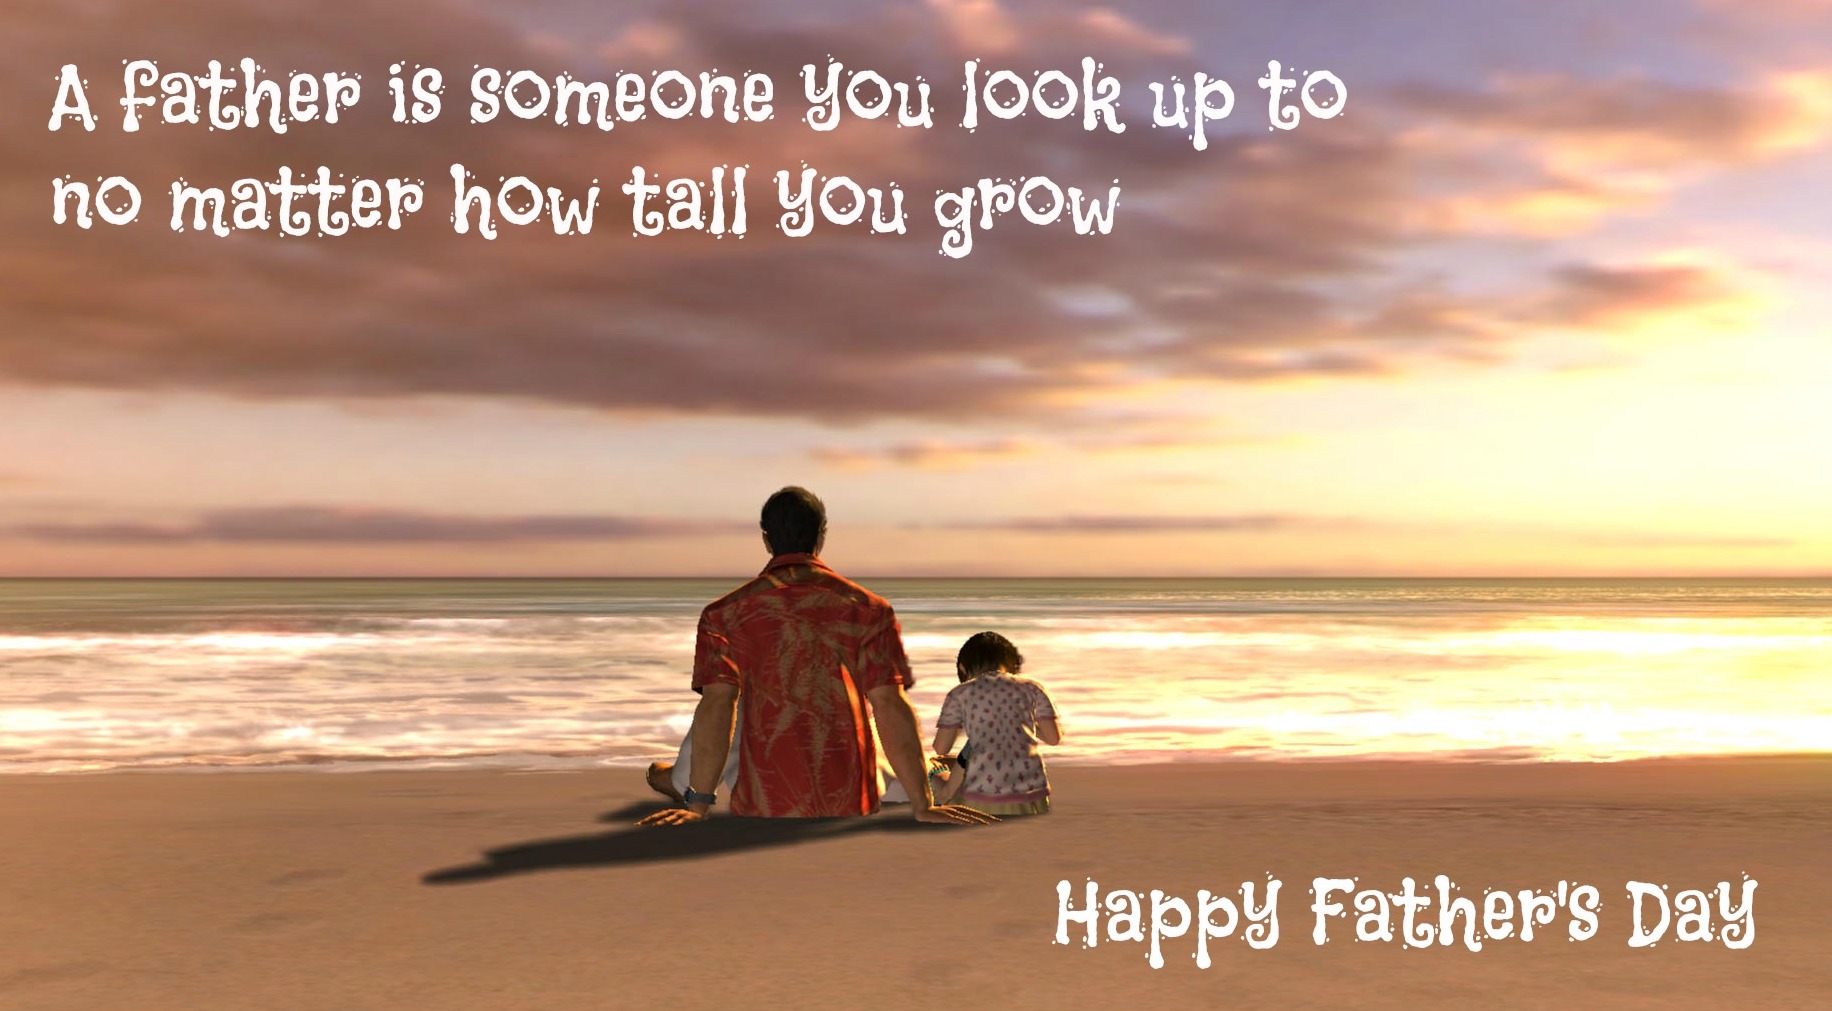 happy-father-s-day-2020-wishes-images-beautiful-quotes-and-greetings-from-son-and-daughter